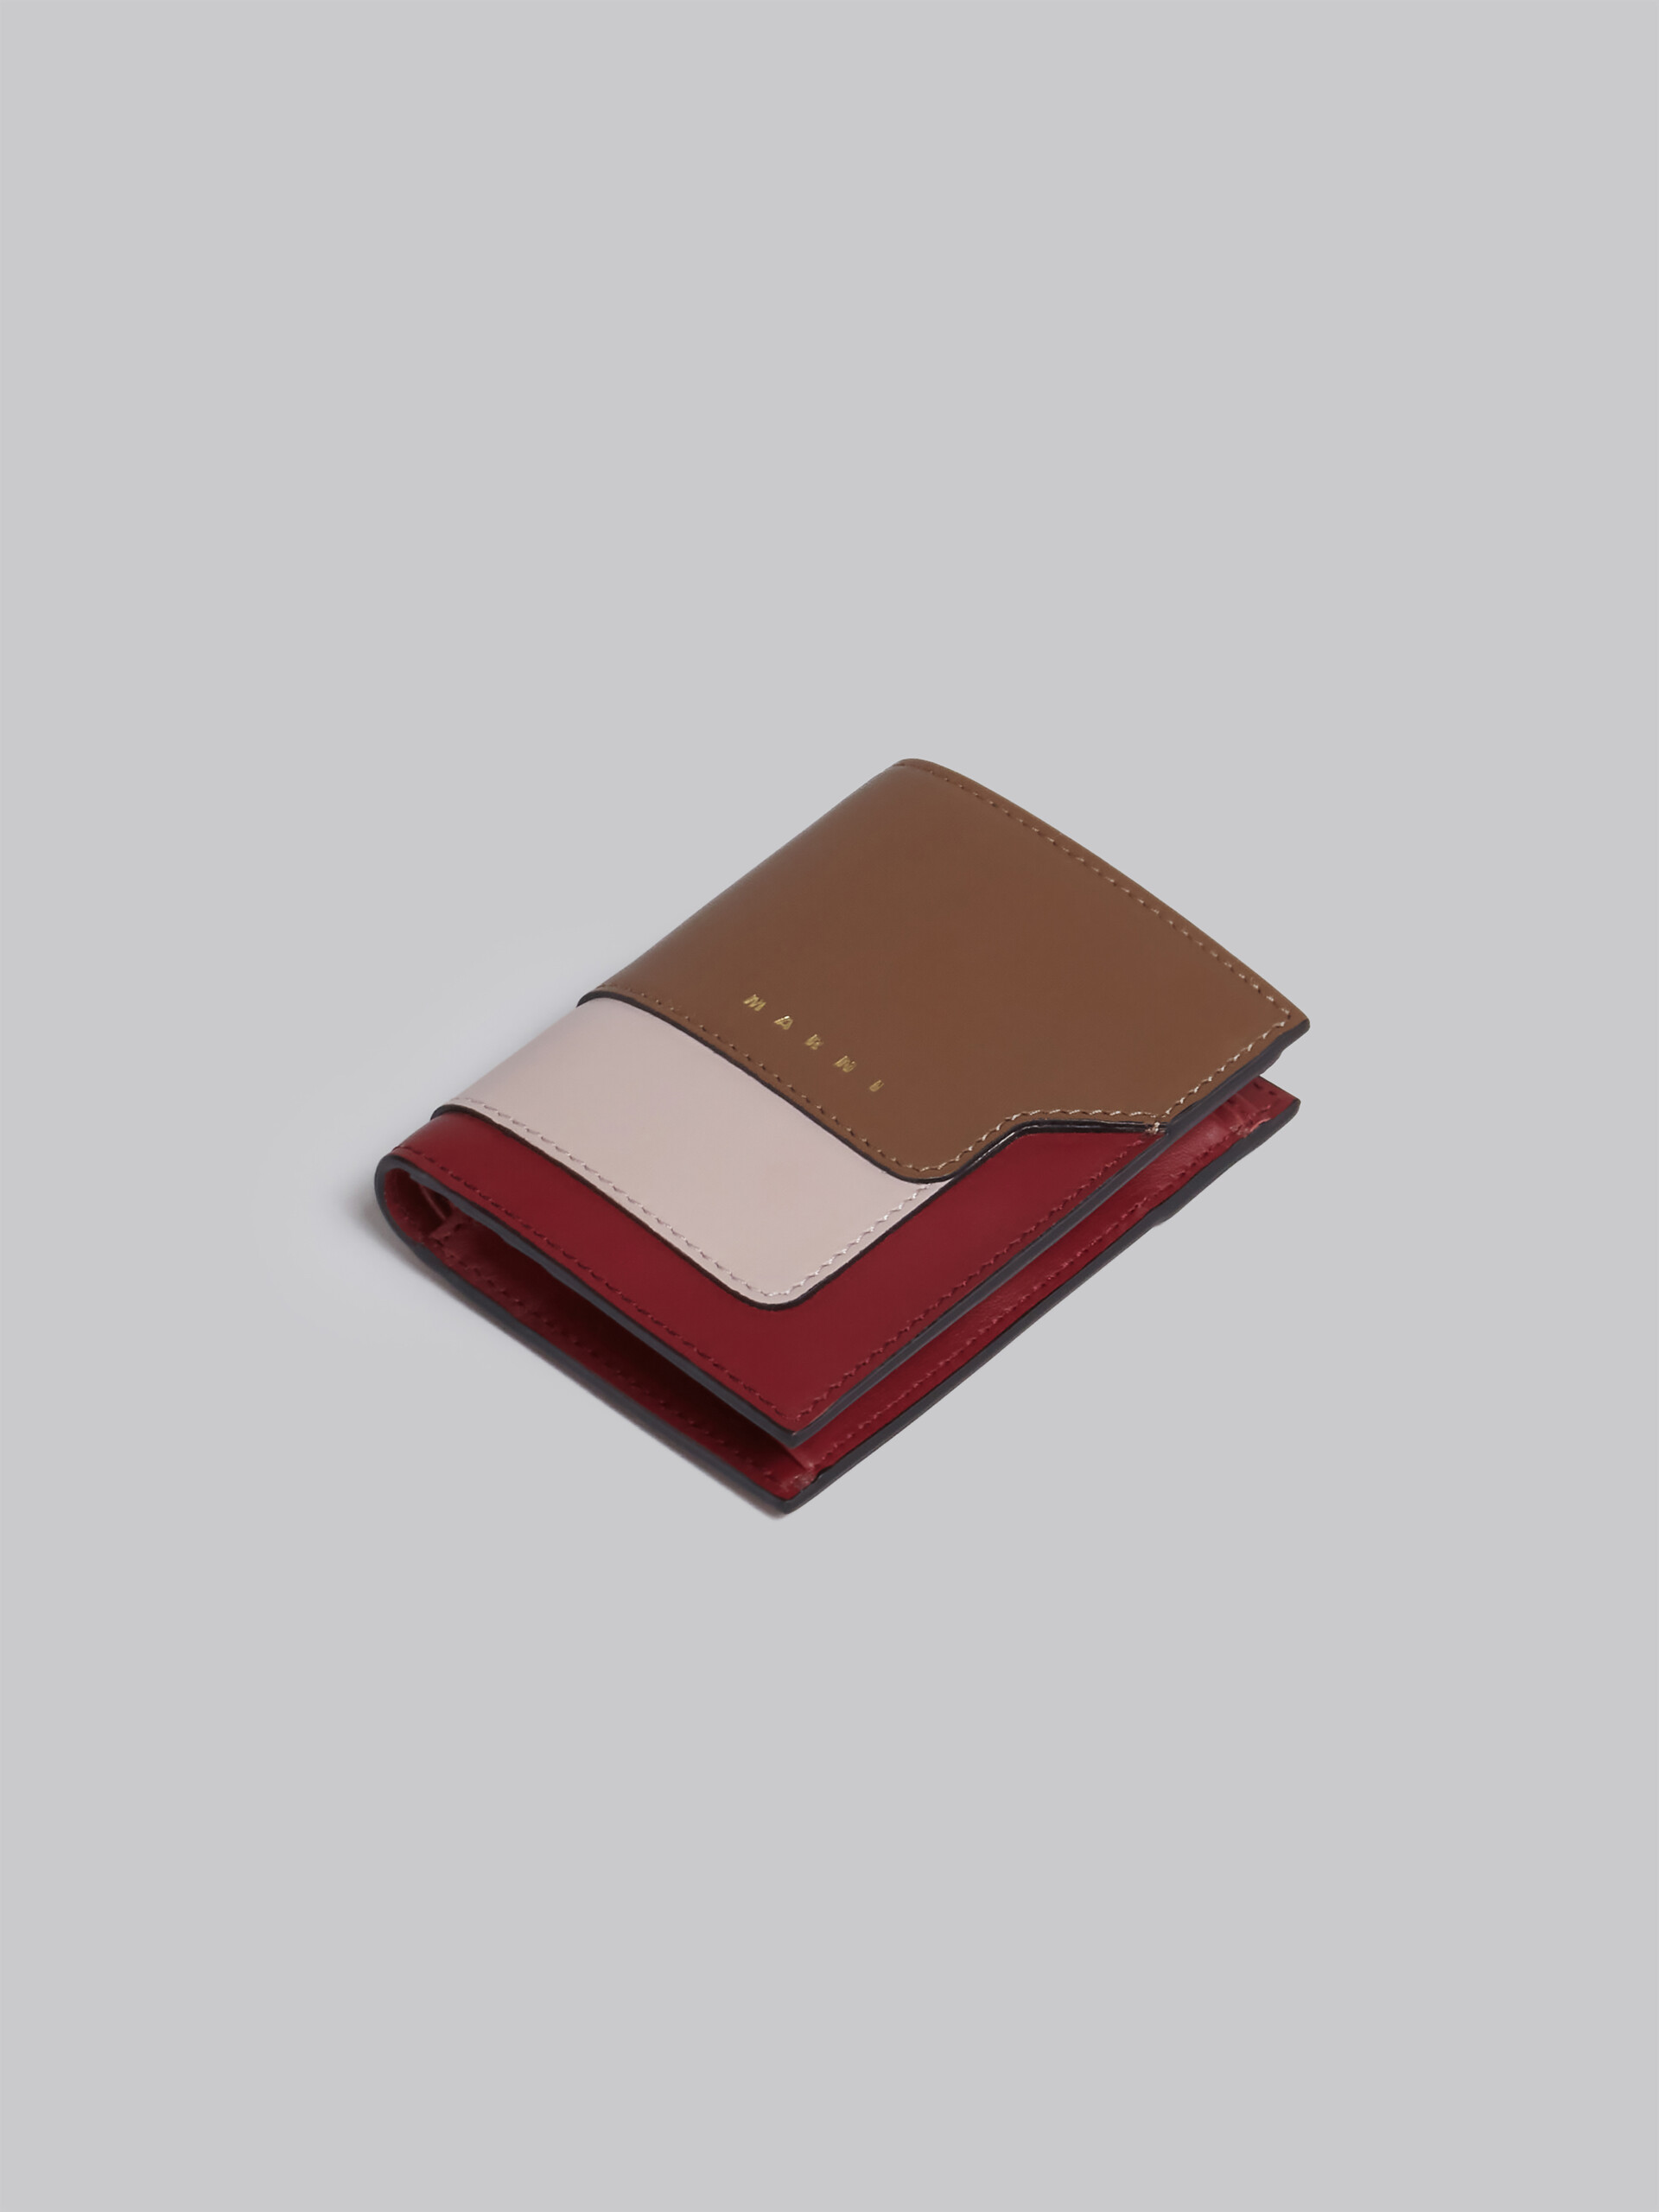 Grey white and brown leather bi-fold wallet - Wallets - Image 5